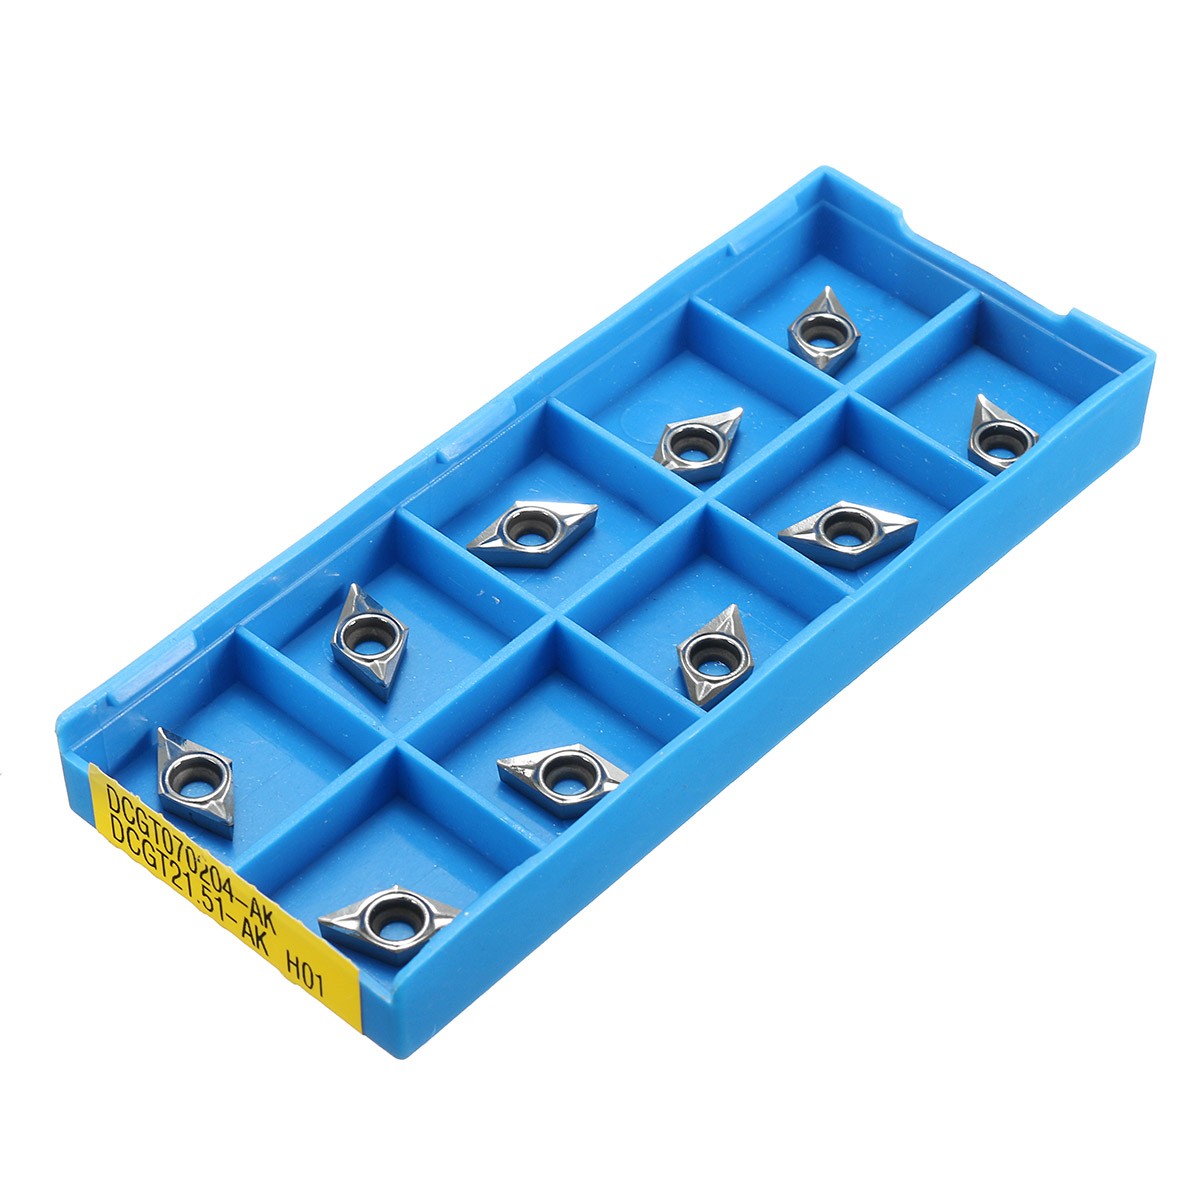 

10pcs DCGT0702-AK H01 / DCGT21.51-AK H01 Inserts Used for Aluminum Turning Tool Holder Cutter